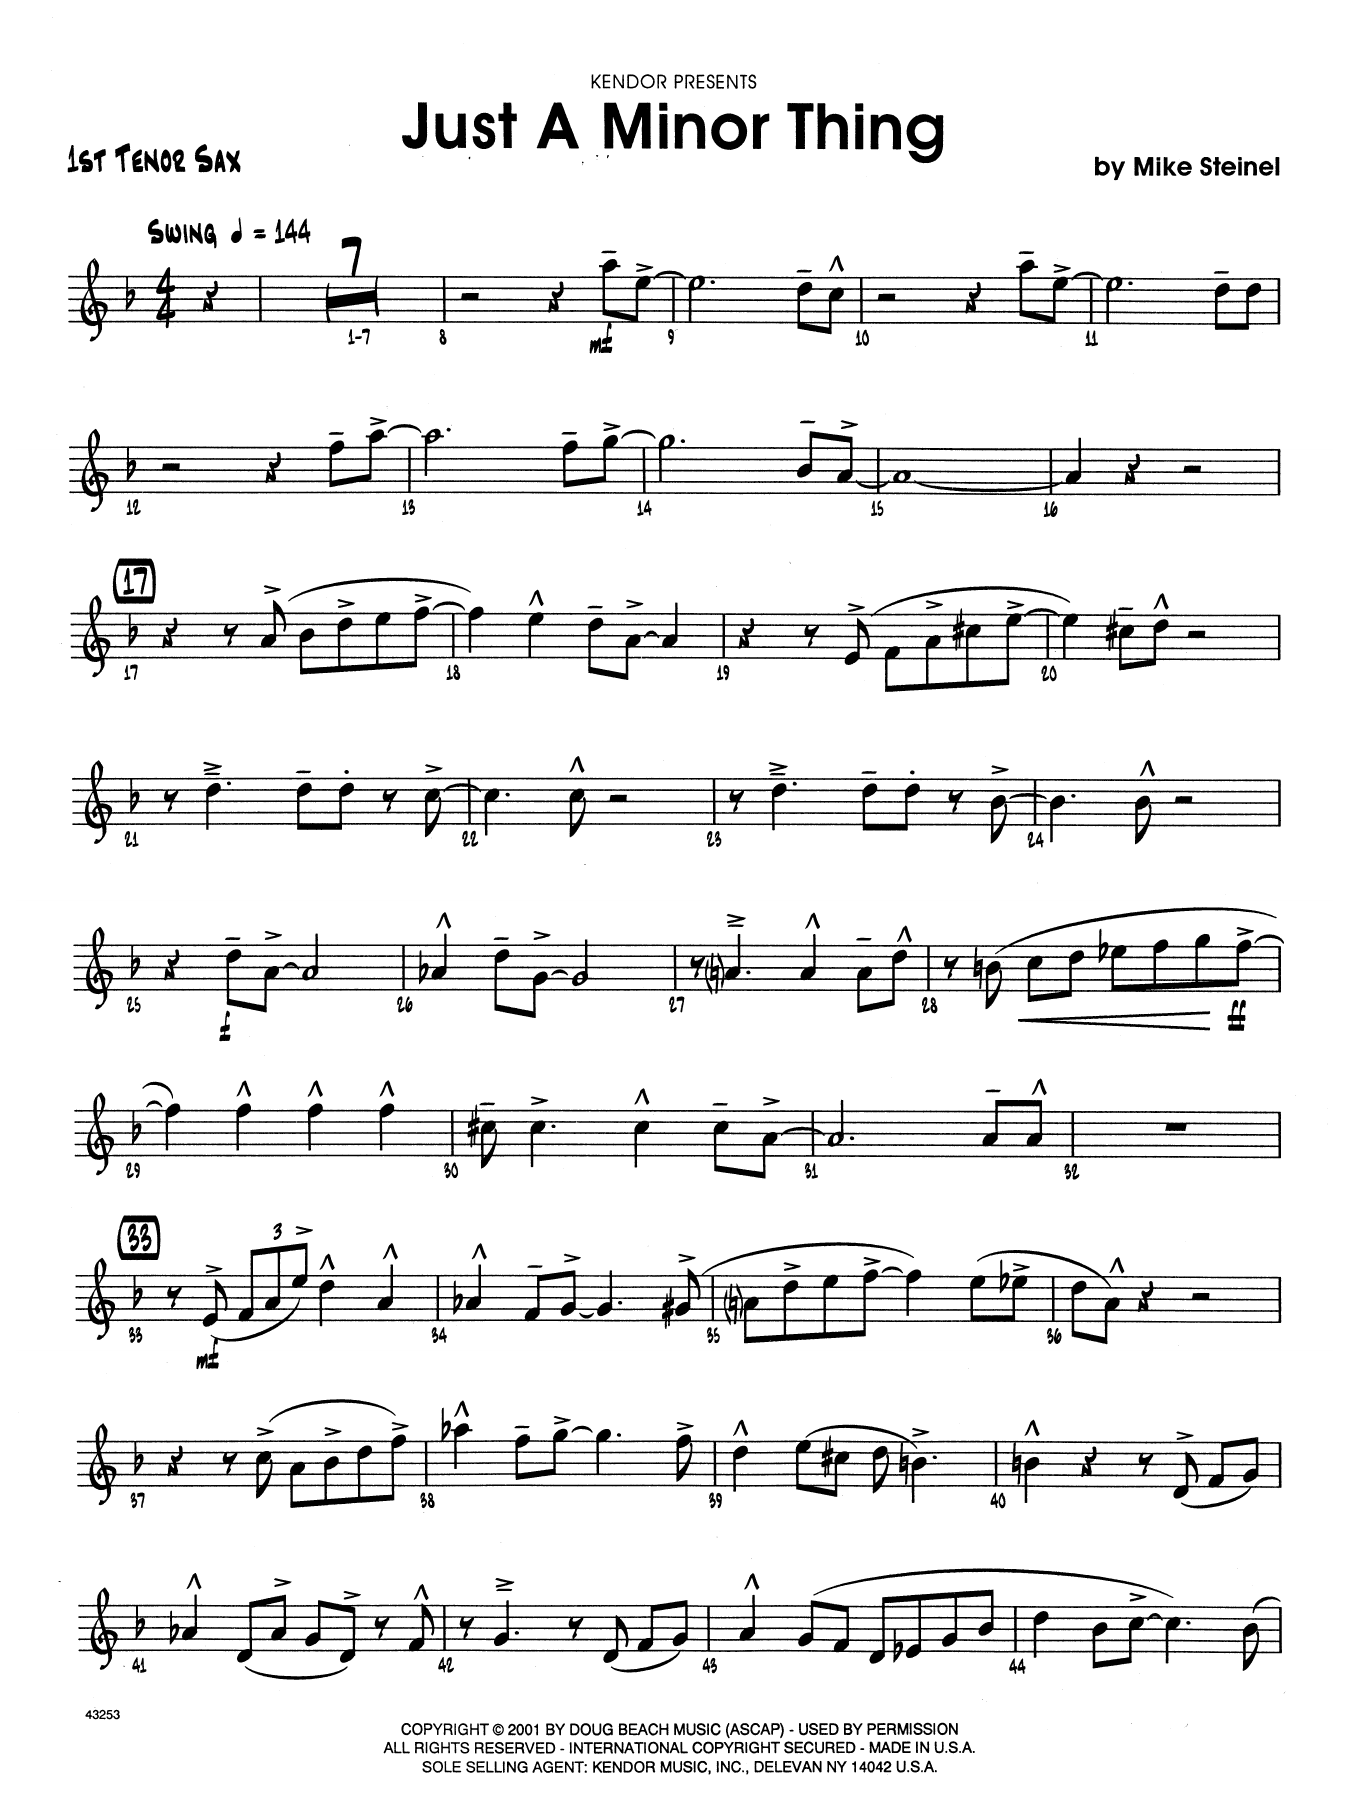 Download Mike Steinel Just A Minor Thing - 1st Tenor Saxophon Sheet Music